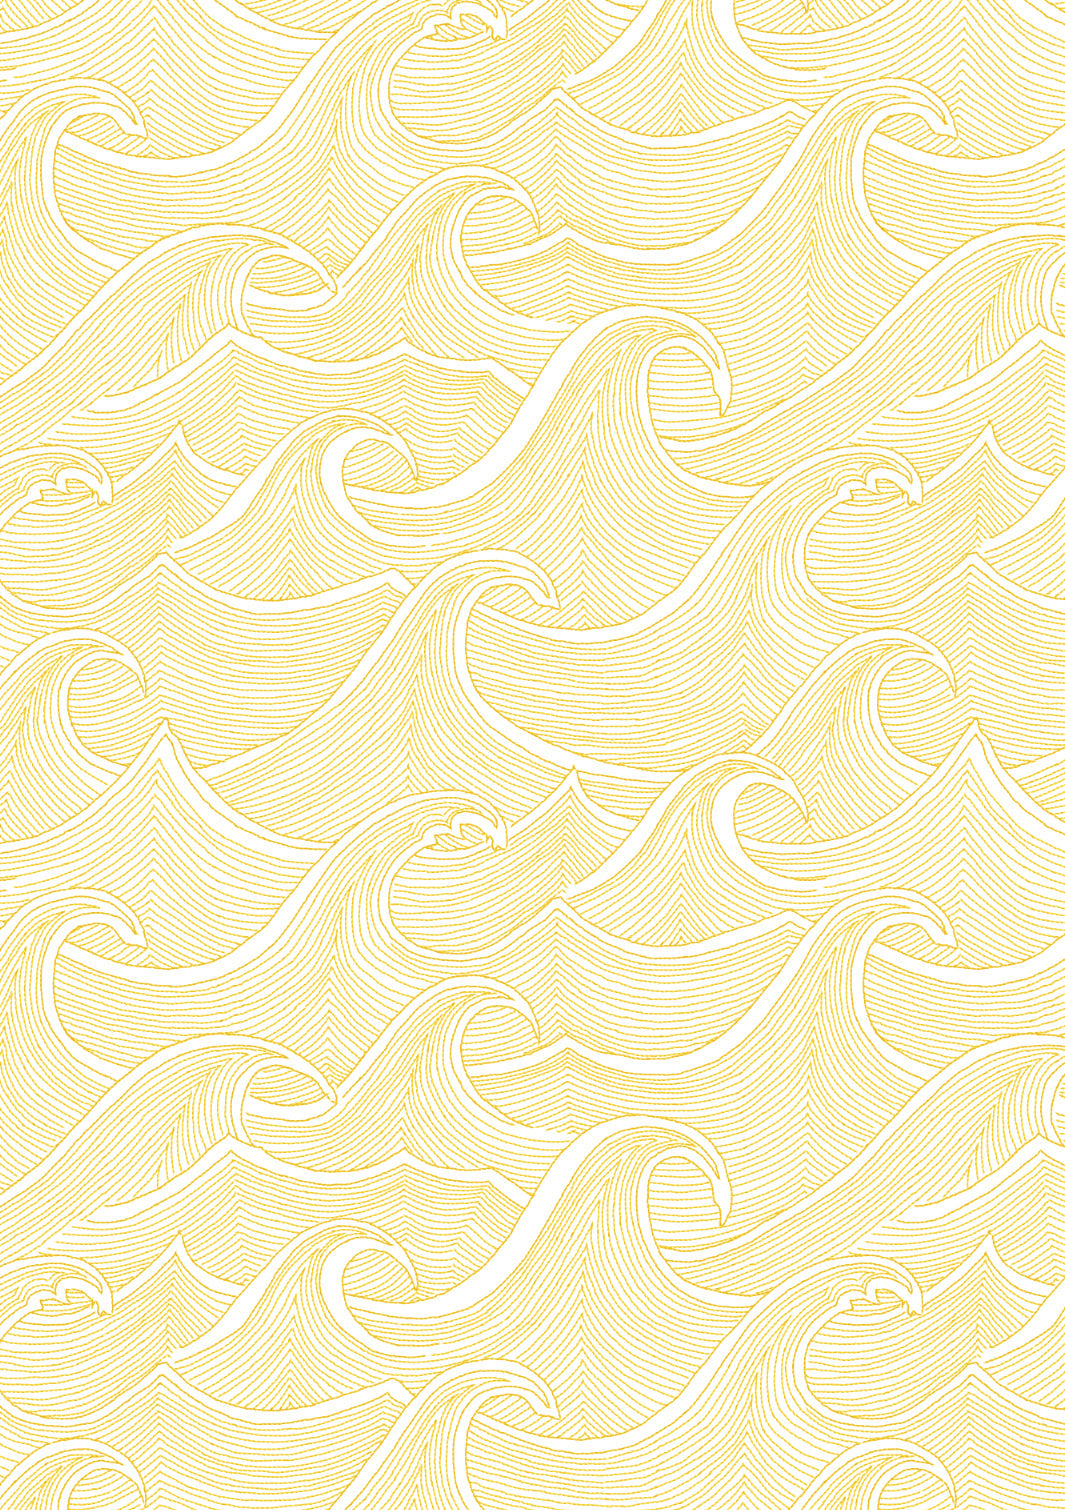 'Waves' Wallpaper by Lingua Franca - Gold on White